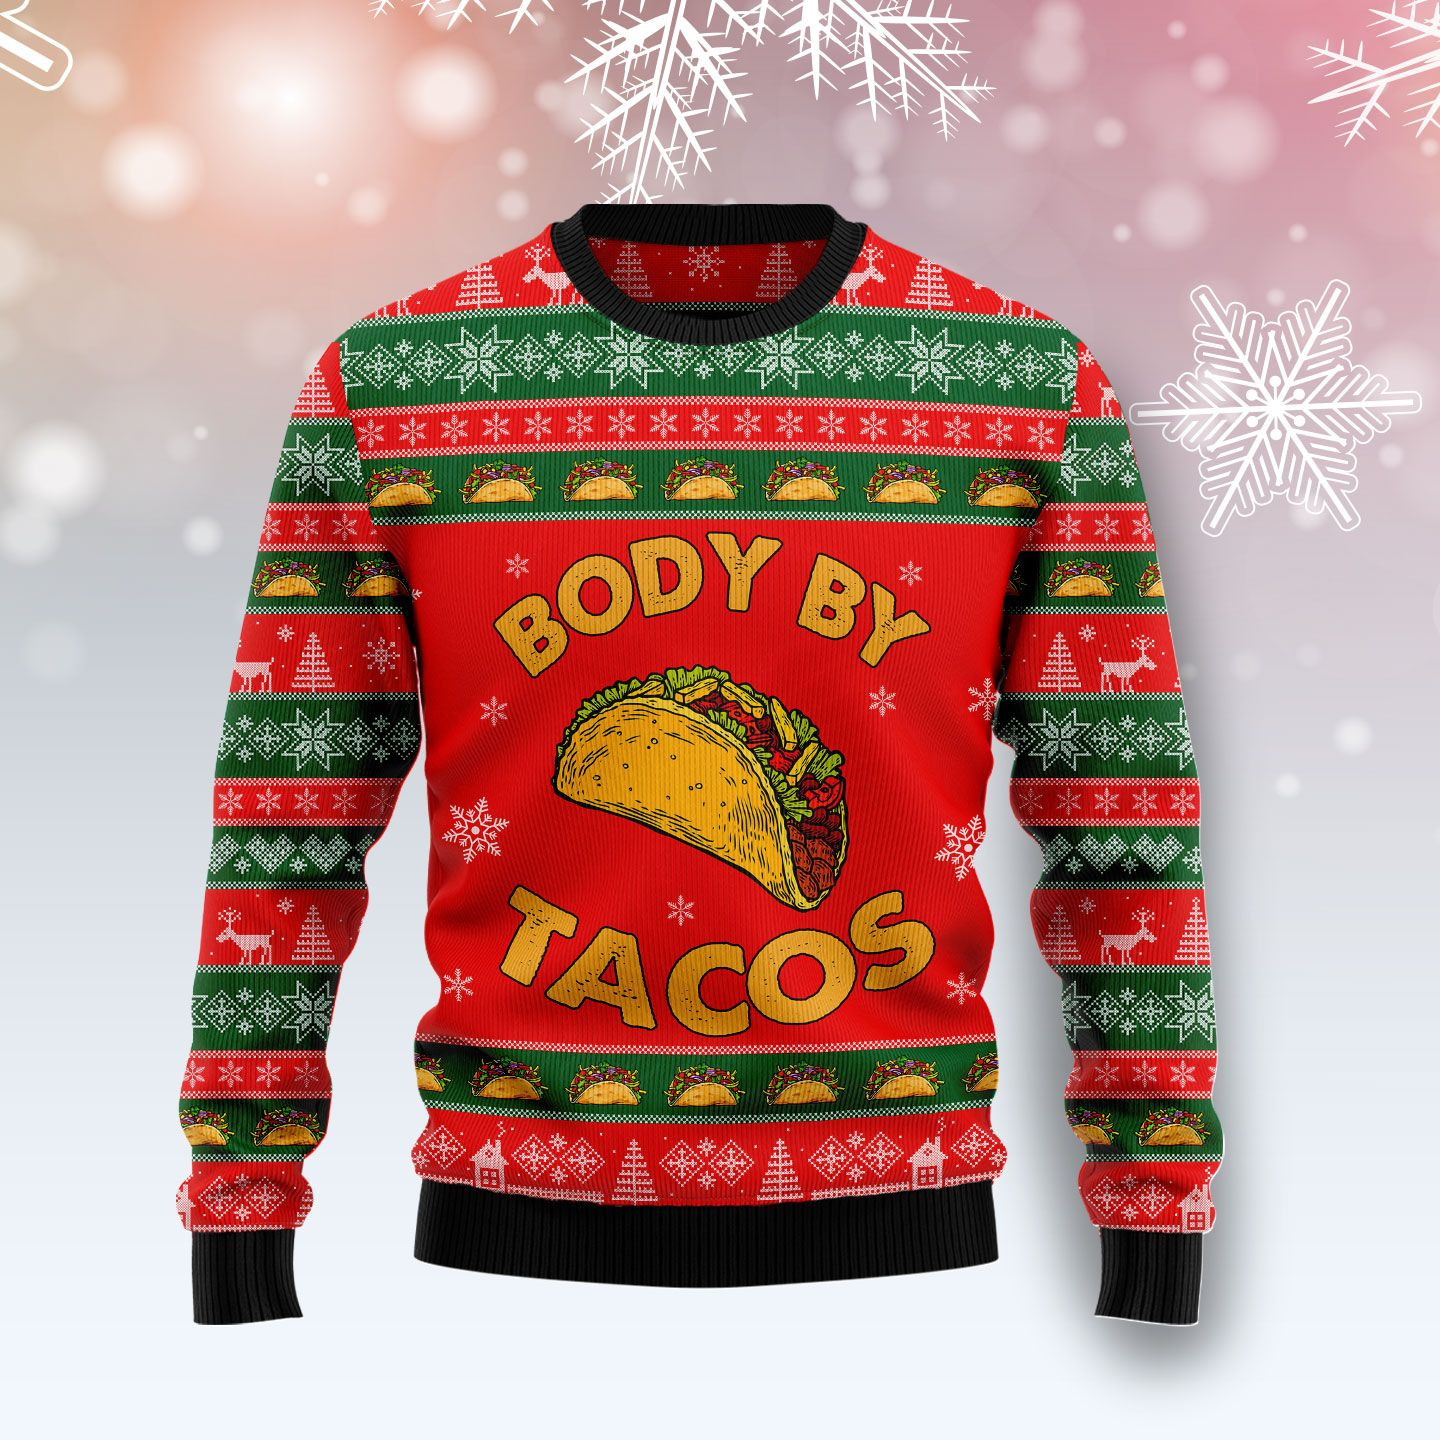 Body By Taco Ugly Sweater